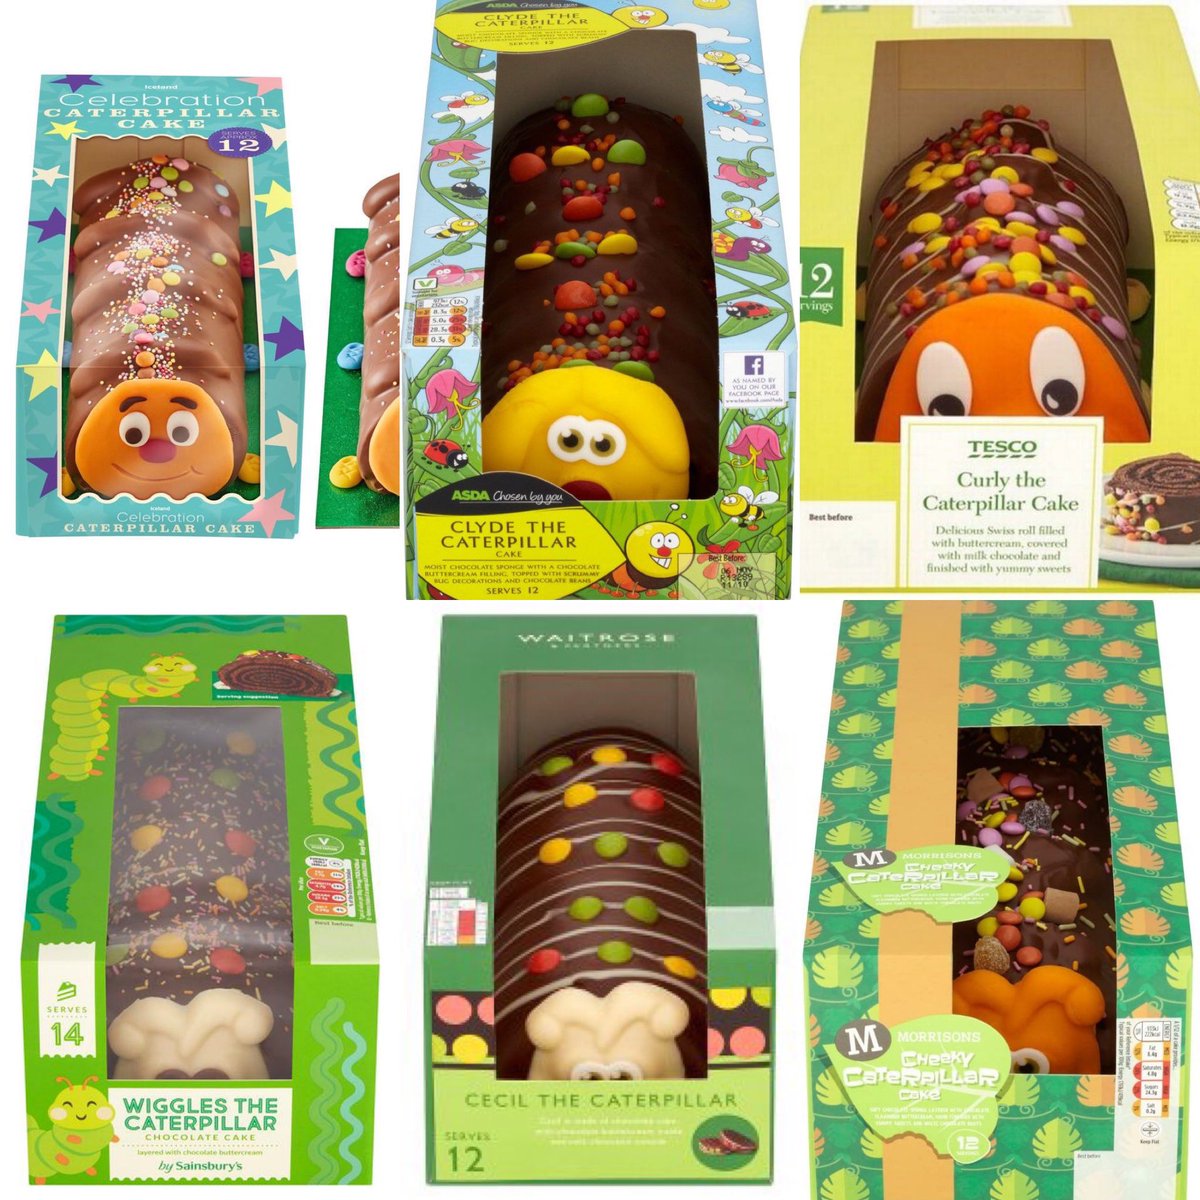 @AldiUK What’s the fuss about? Caterpillar cakes are a thing everywhere! 🐛🍰